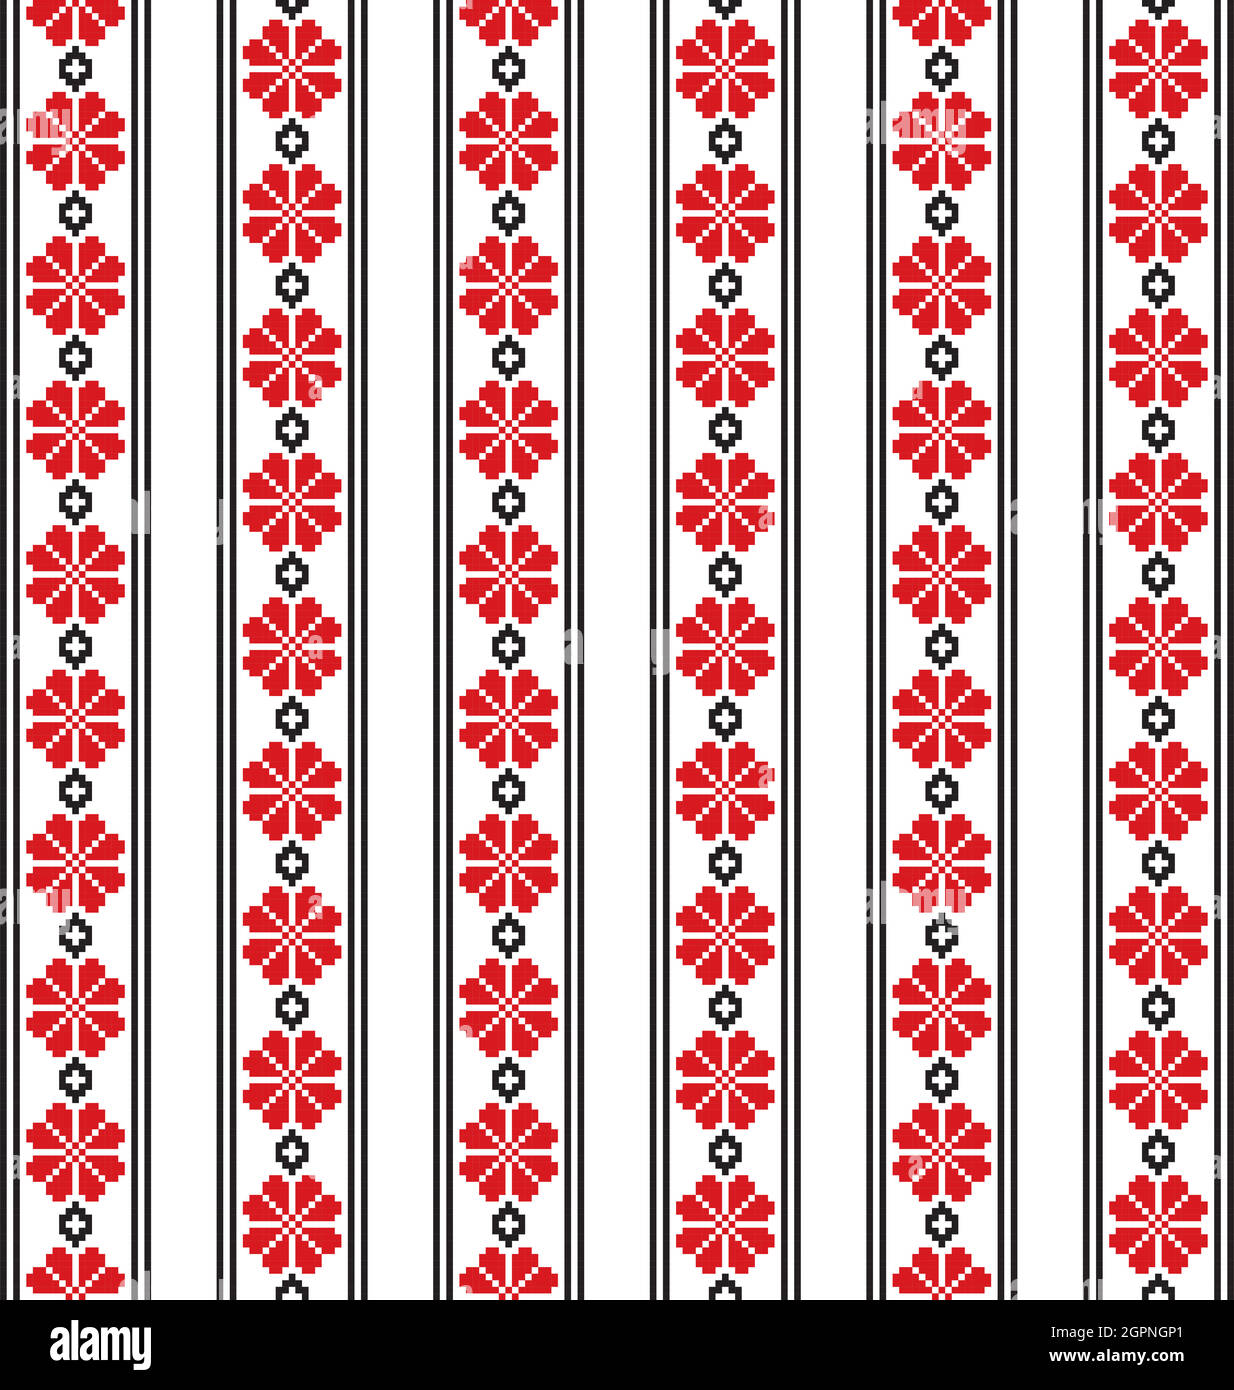 Romanian traditional pattern Stock Vector